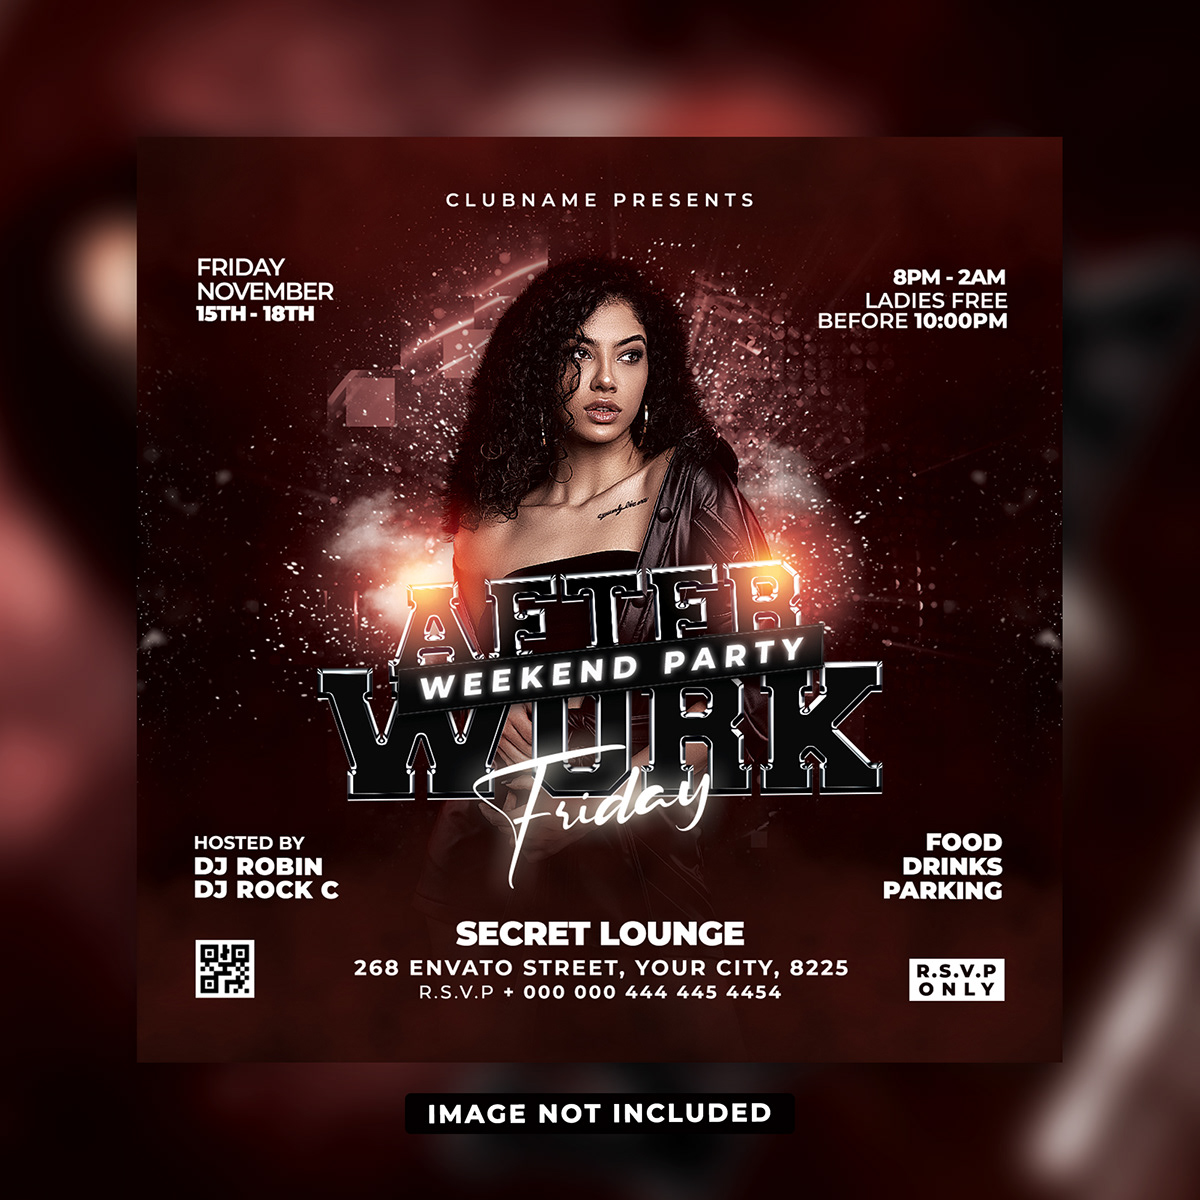 club event DJ Flyer event flyer Event Poster flyer Flyer Design flyer template Night club flyer party flyer psd